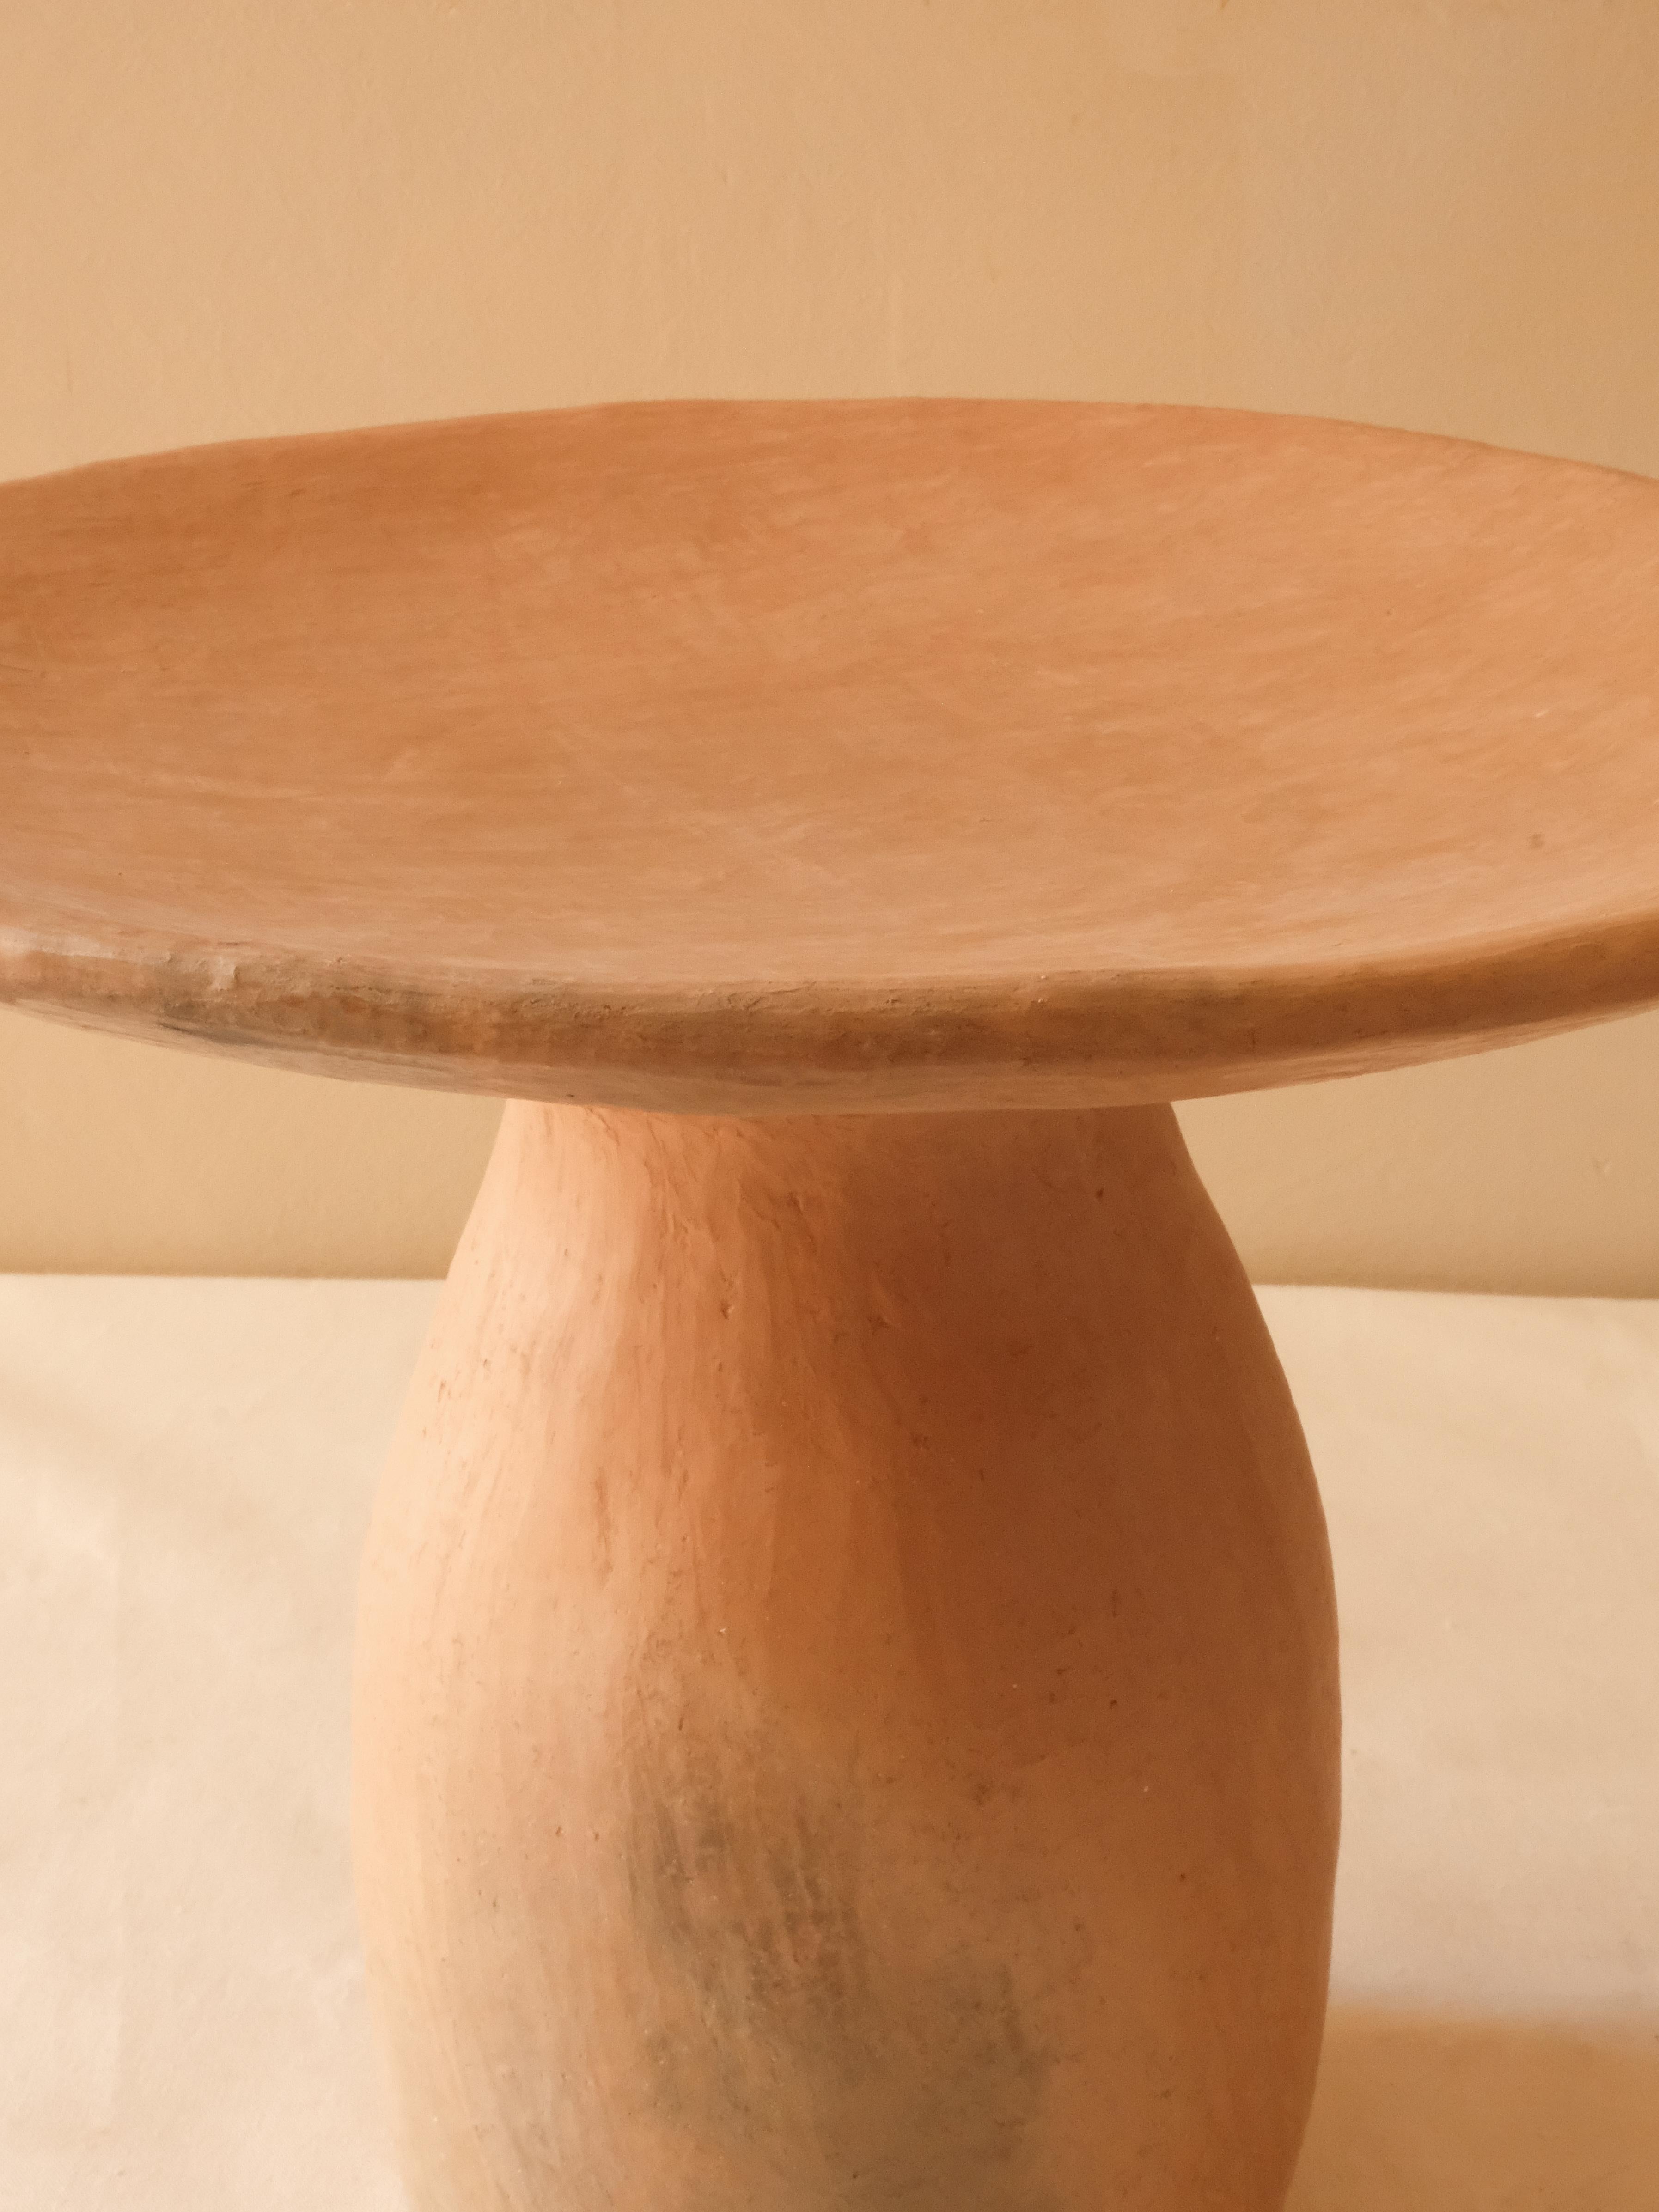 Terracotta contemporary Side Tables Made of local Clay, Handbuilt handfired For Sale 2